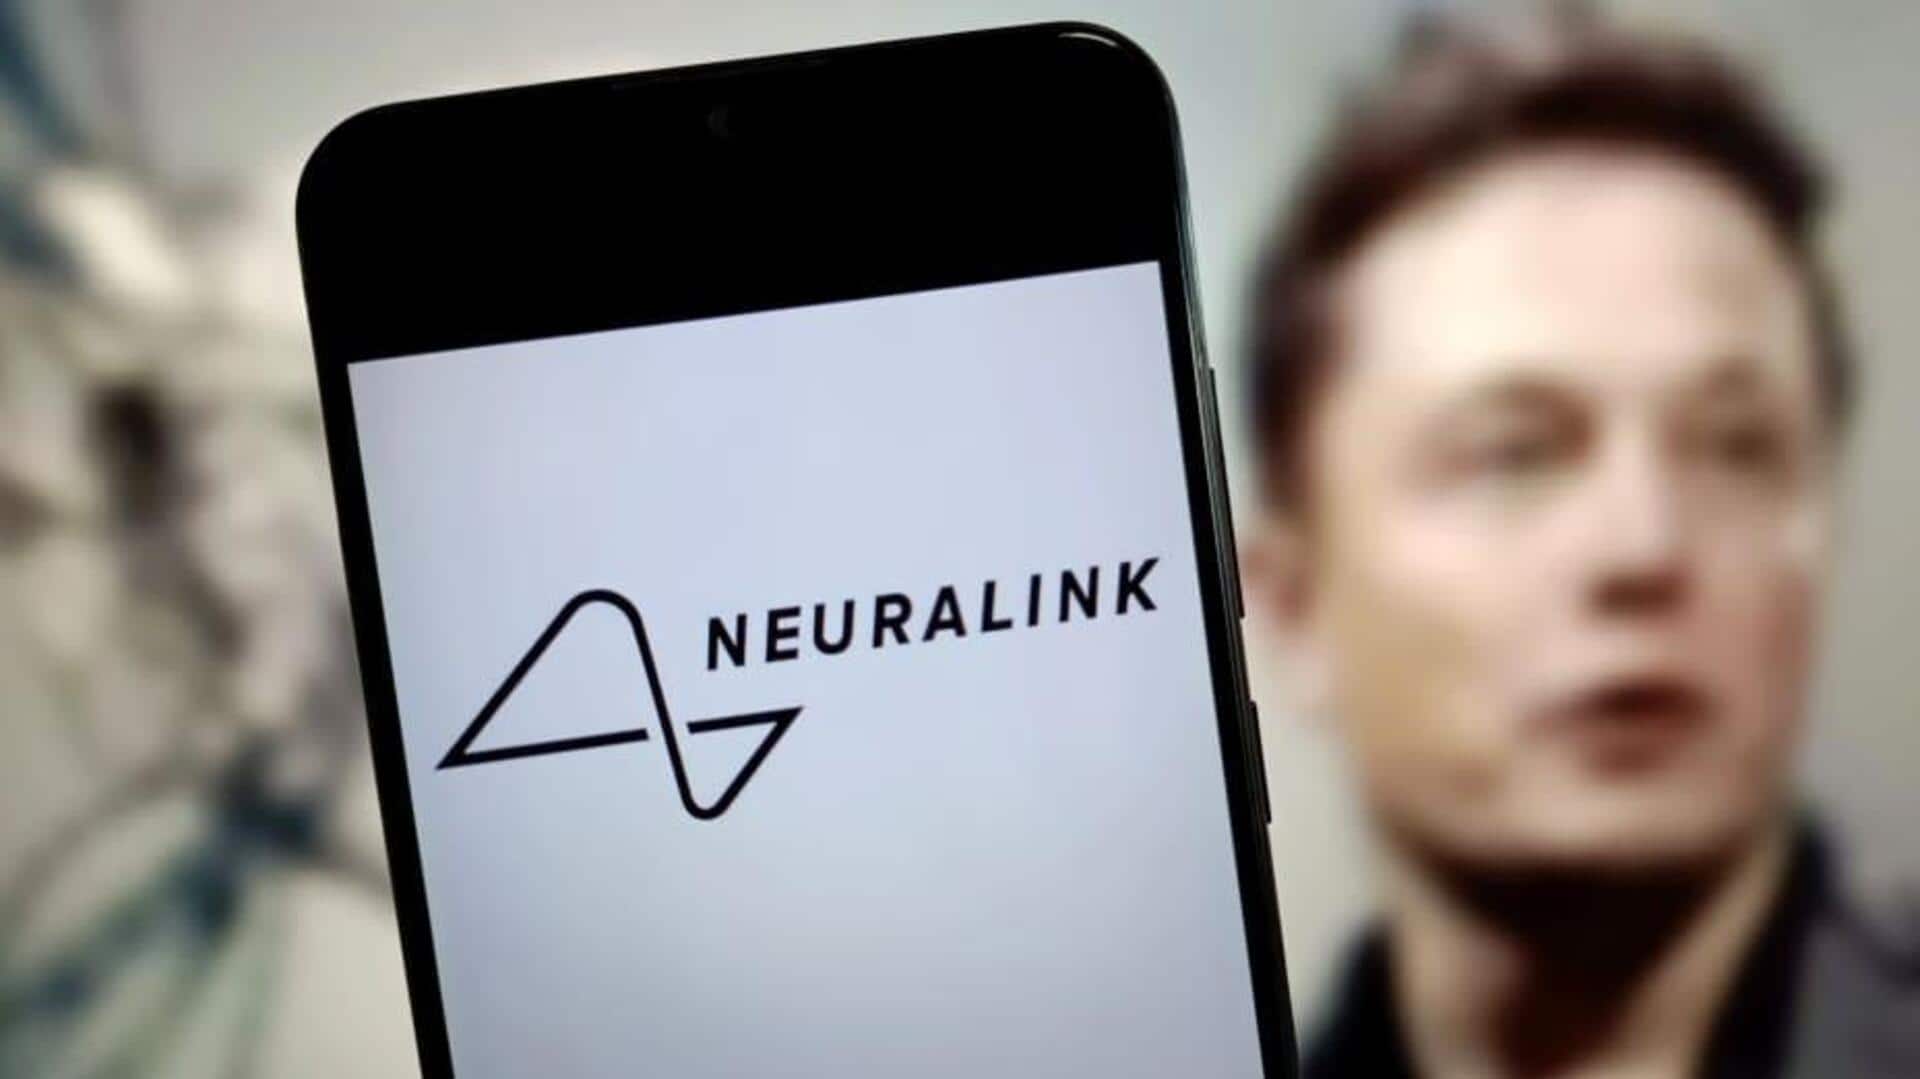 Musk's Neuralink implants brain chip in human for first time